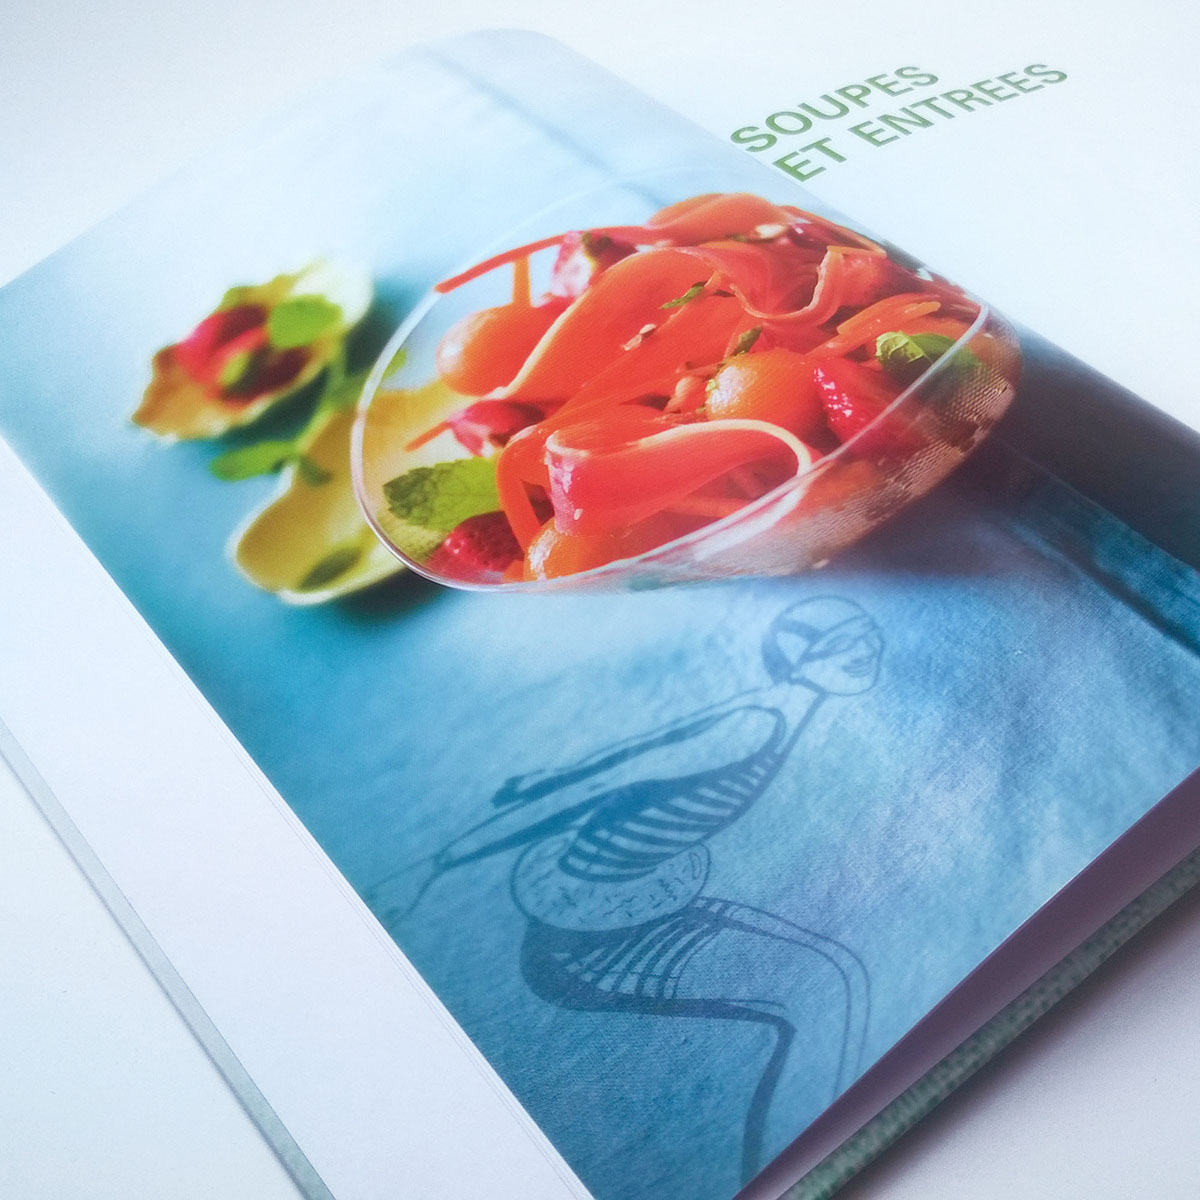 cooking book recipes thermomix